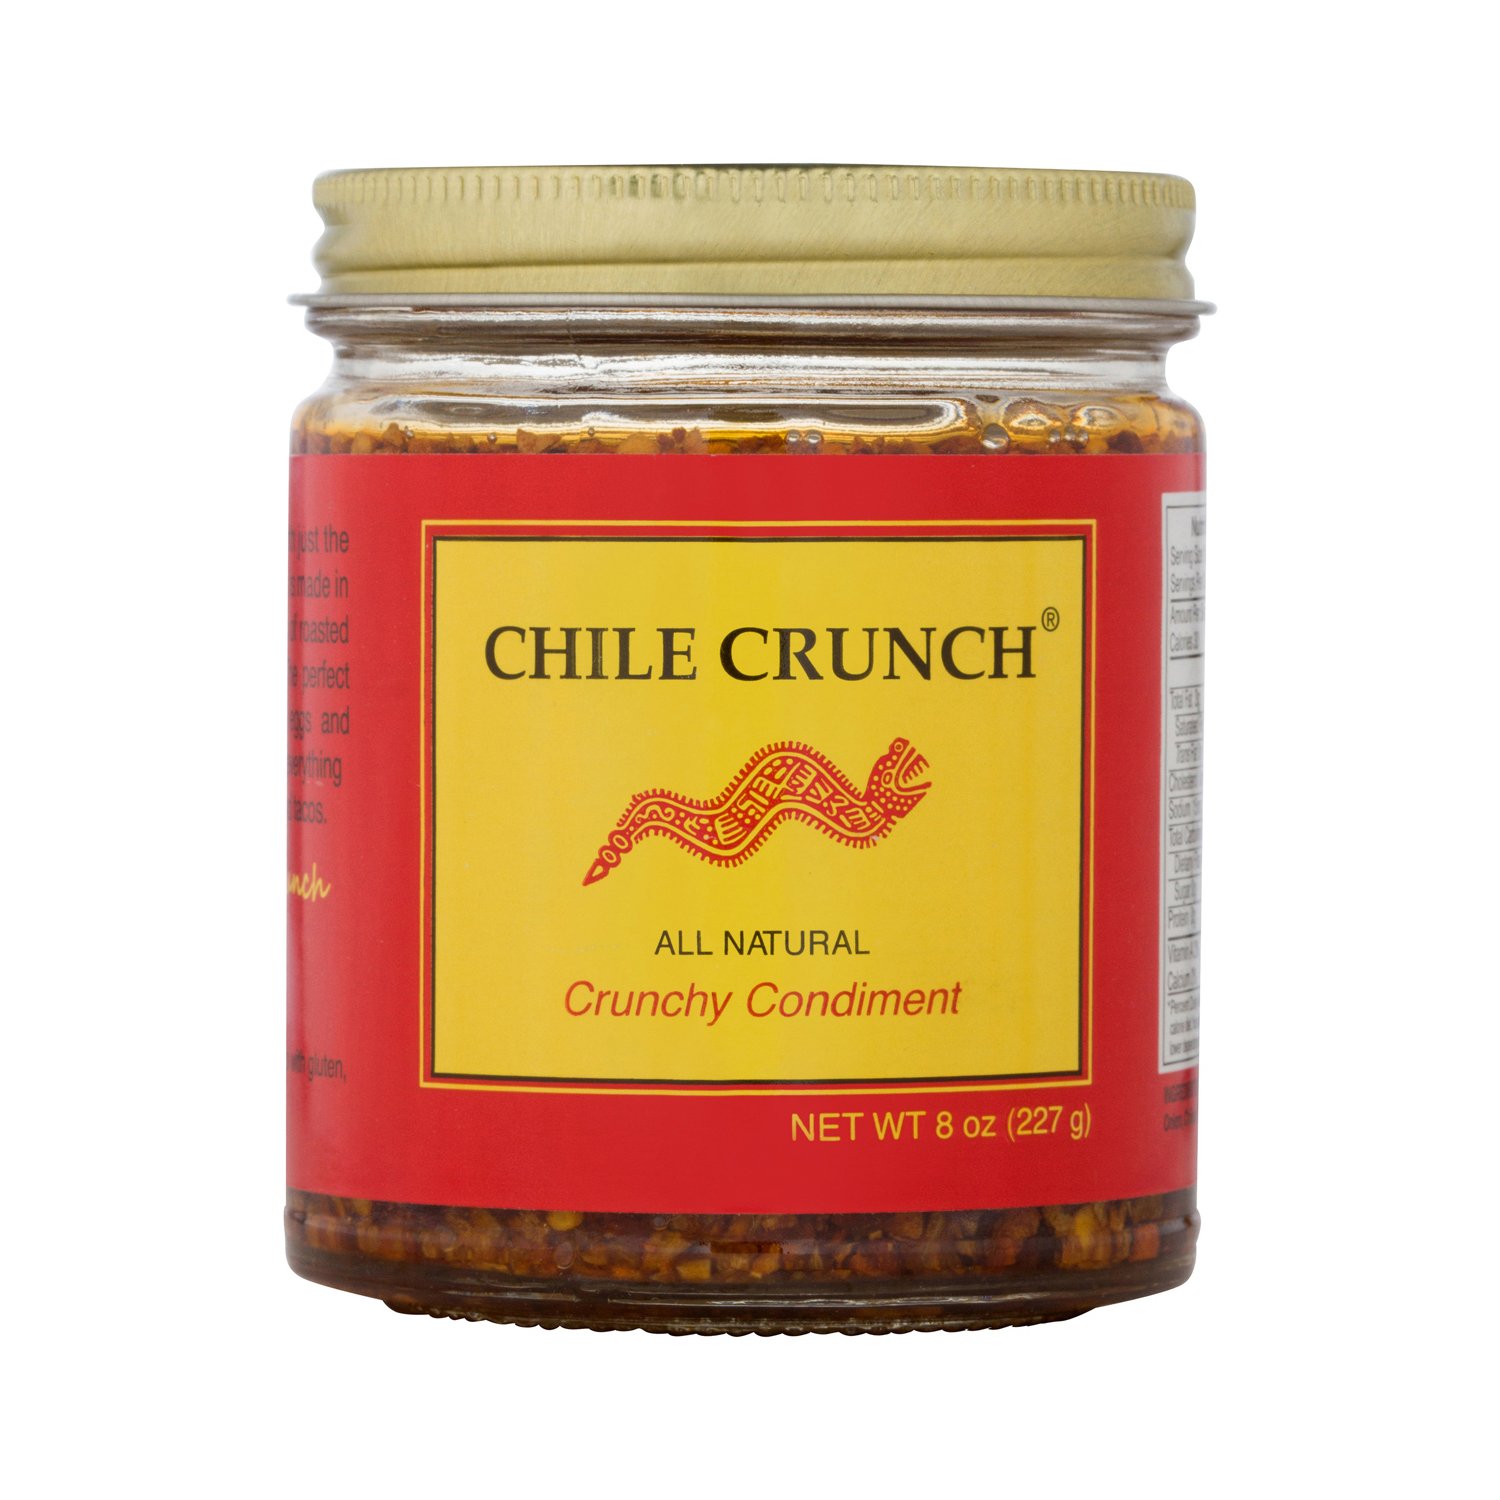 Chile Crunch – A Crunchy All Natural Spicy Condiment